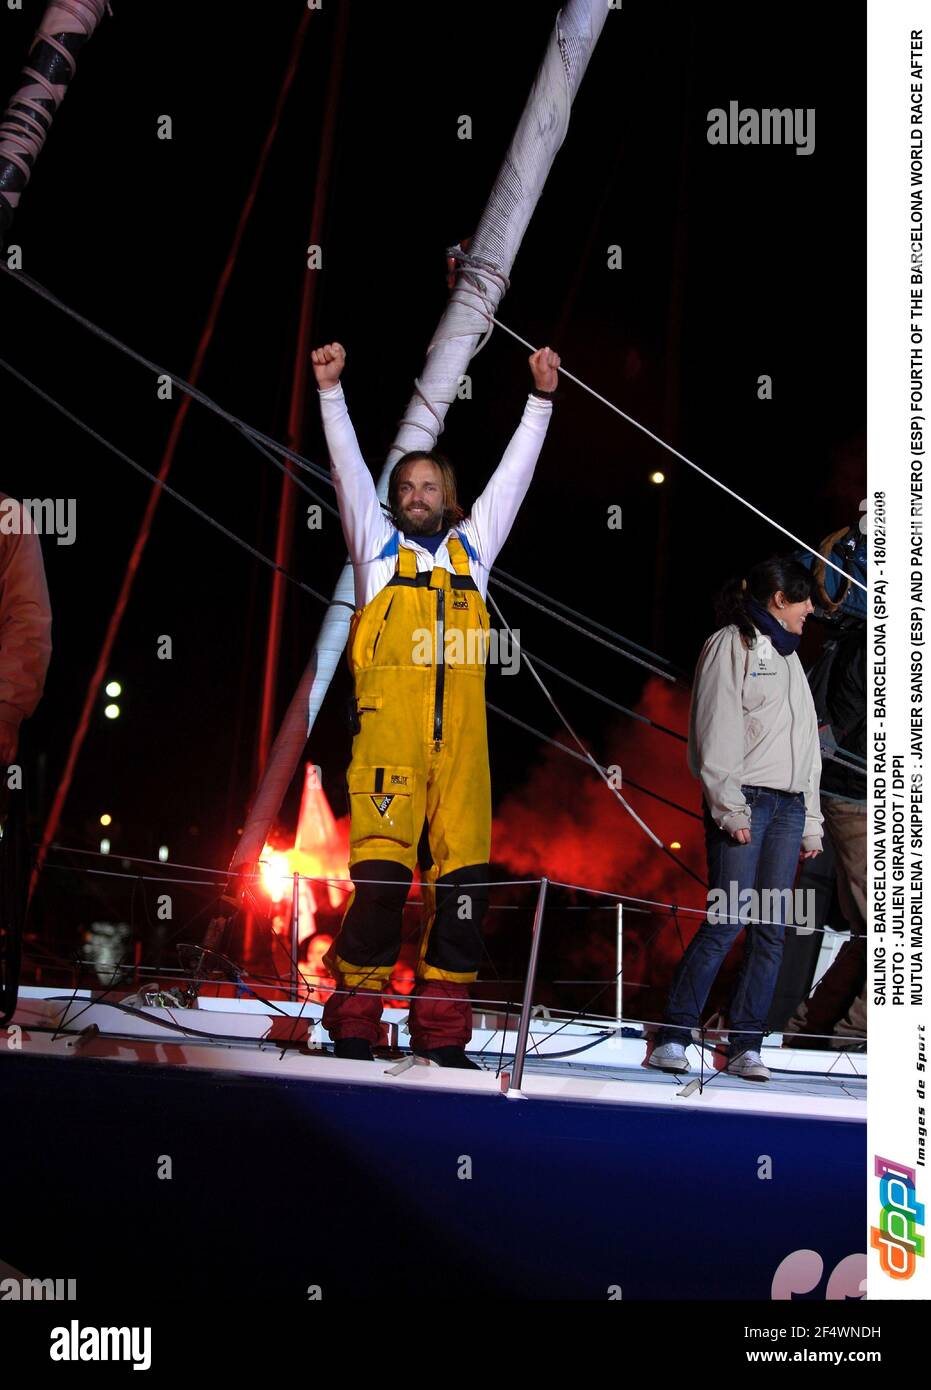 SAILING - BARCELONA WOLRD RACE - BARCELONA (SPA) - 18/02/2008 PHOTO : JULIEN GIRARDOT / DPPI MUTUA MADRILENA / SKIPPERS : JAVIER SANSO (ESP) AND PACHI RIVERO (ESP) FOURTH OF THE BARCELONA WORLD RACE AFTER 99 DAYS 12 HOURS 18 MINUTES AND 40 SECONDS Stock Photo